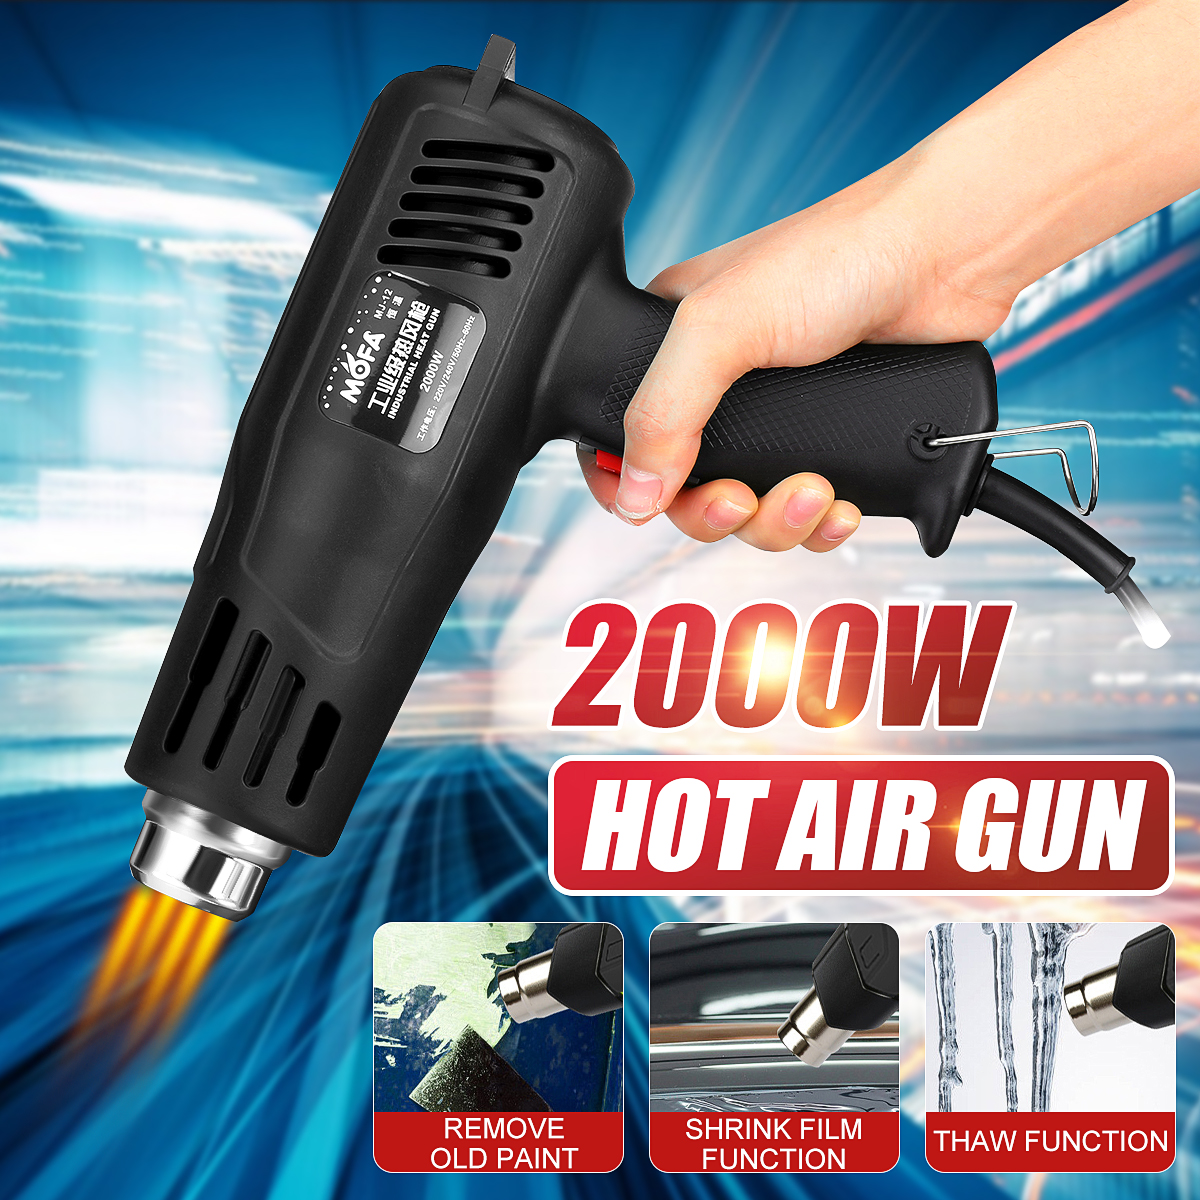 2000W-220V-Industrial-Electric-Hot-Air-Guns-Adjustable-Thermoregulator-Air-Flow-Heat-Welding-Torch-f-1688931-1